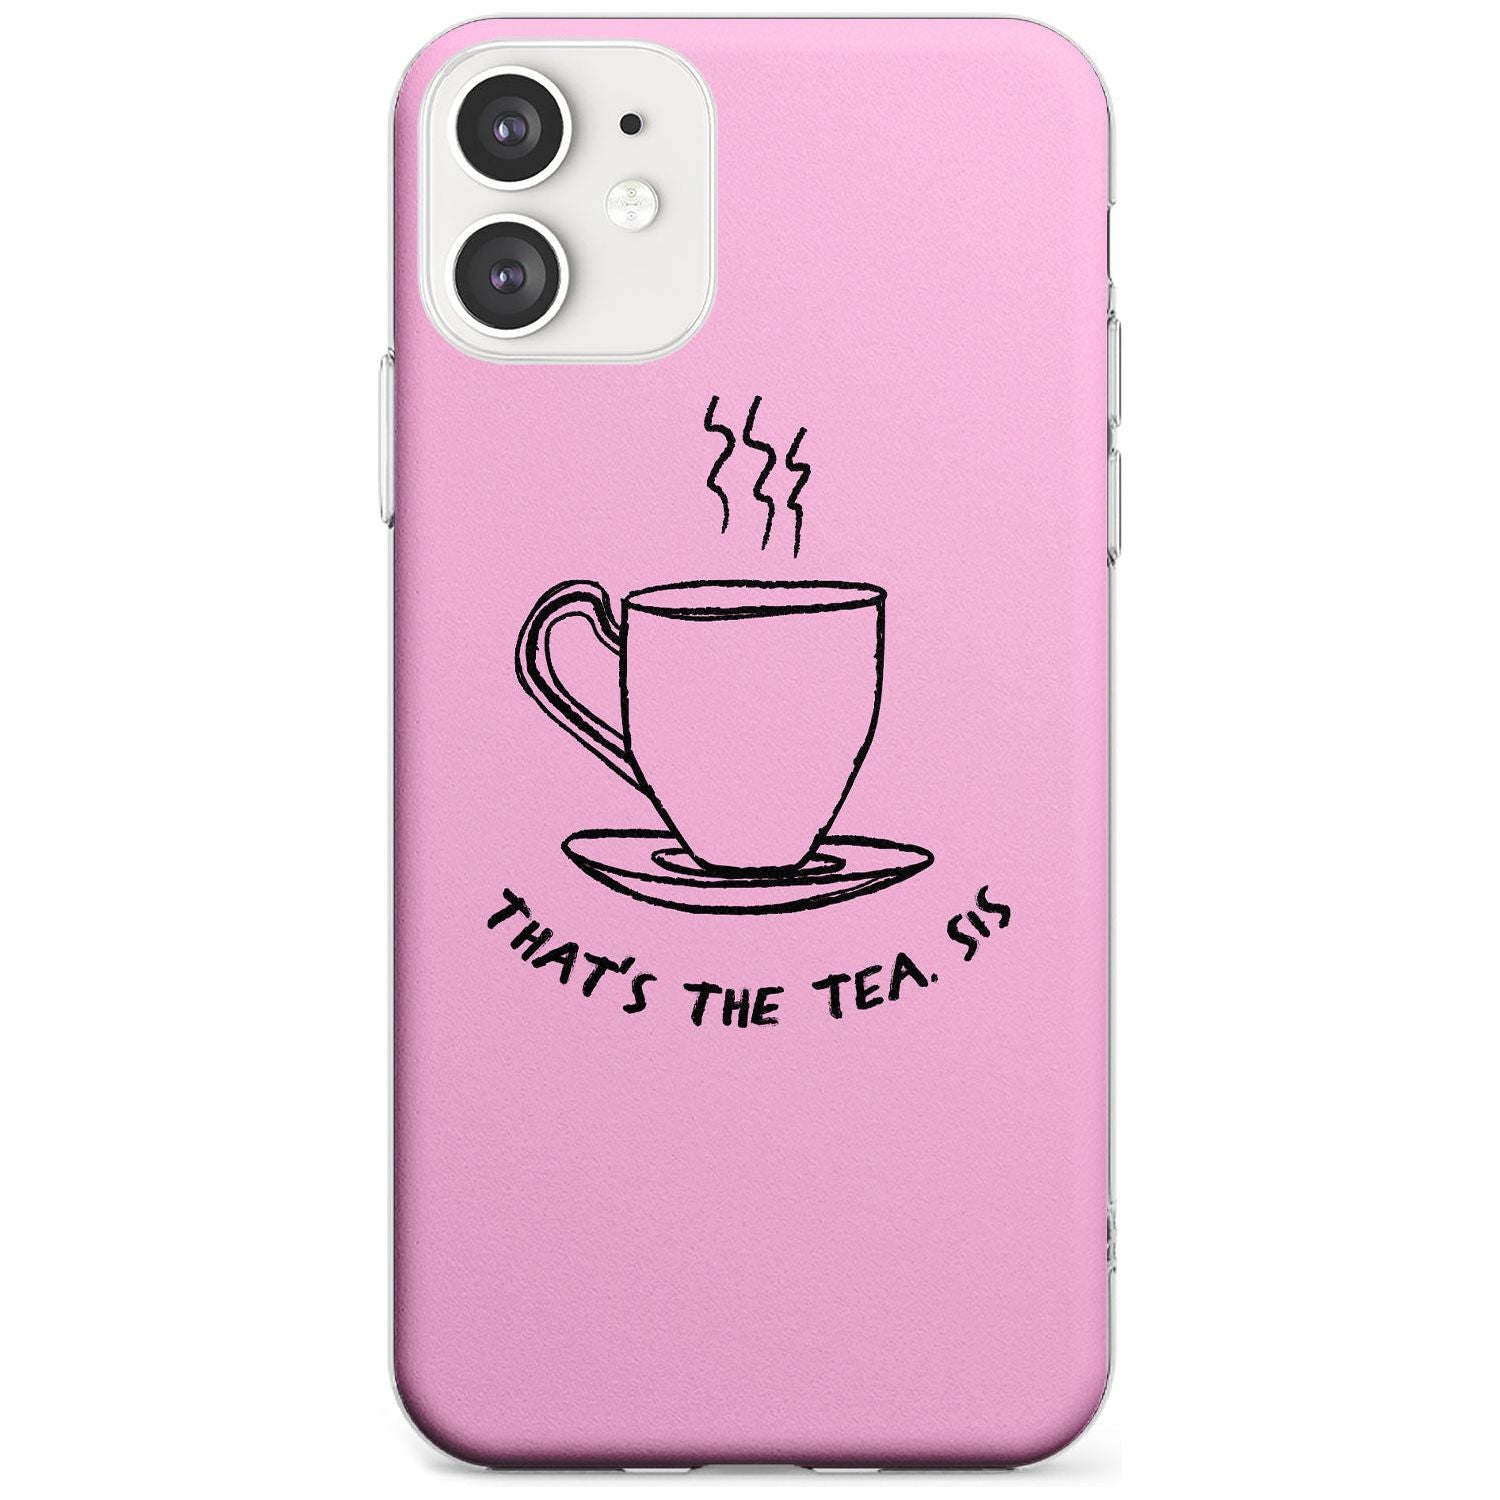 That's the Tea, Sis Pink Slim TPU Phone Case for iPhone 11